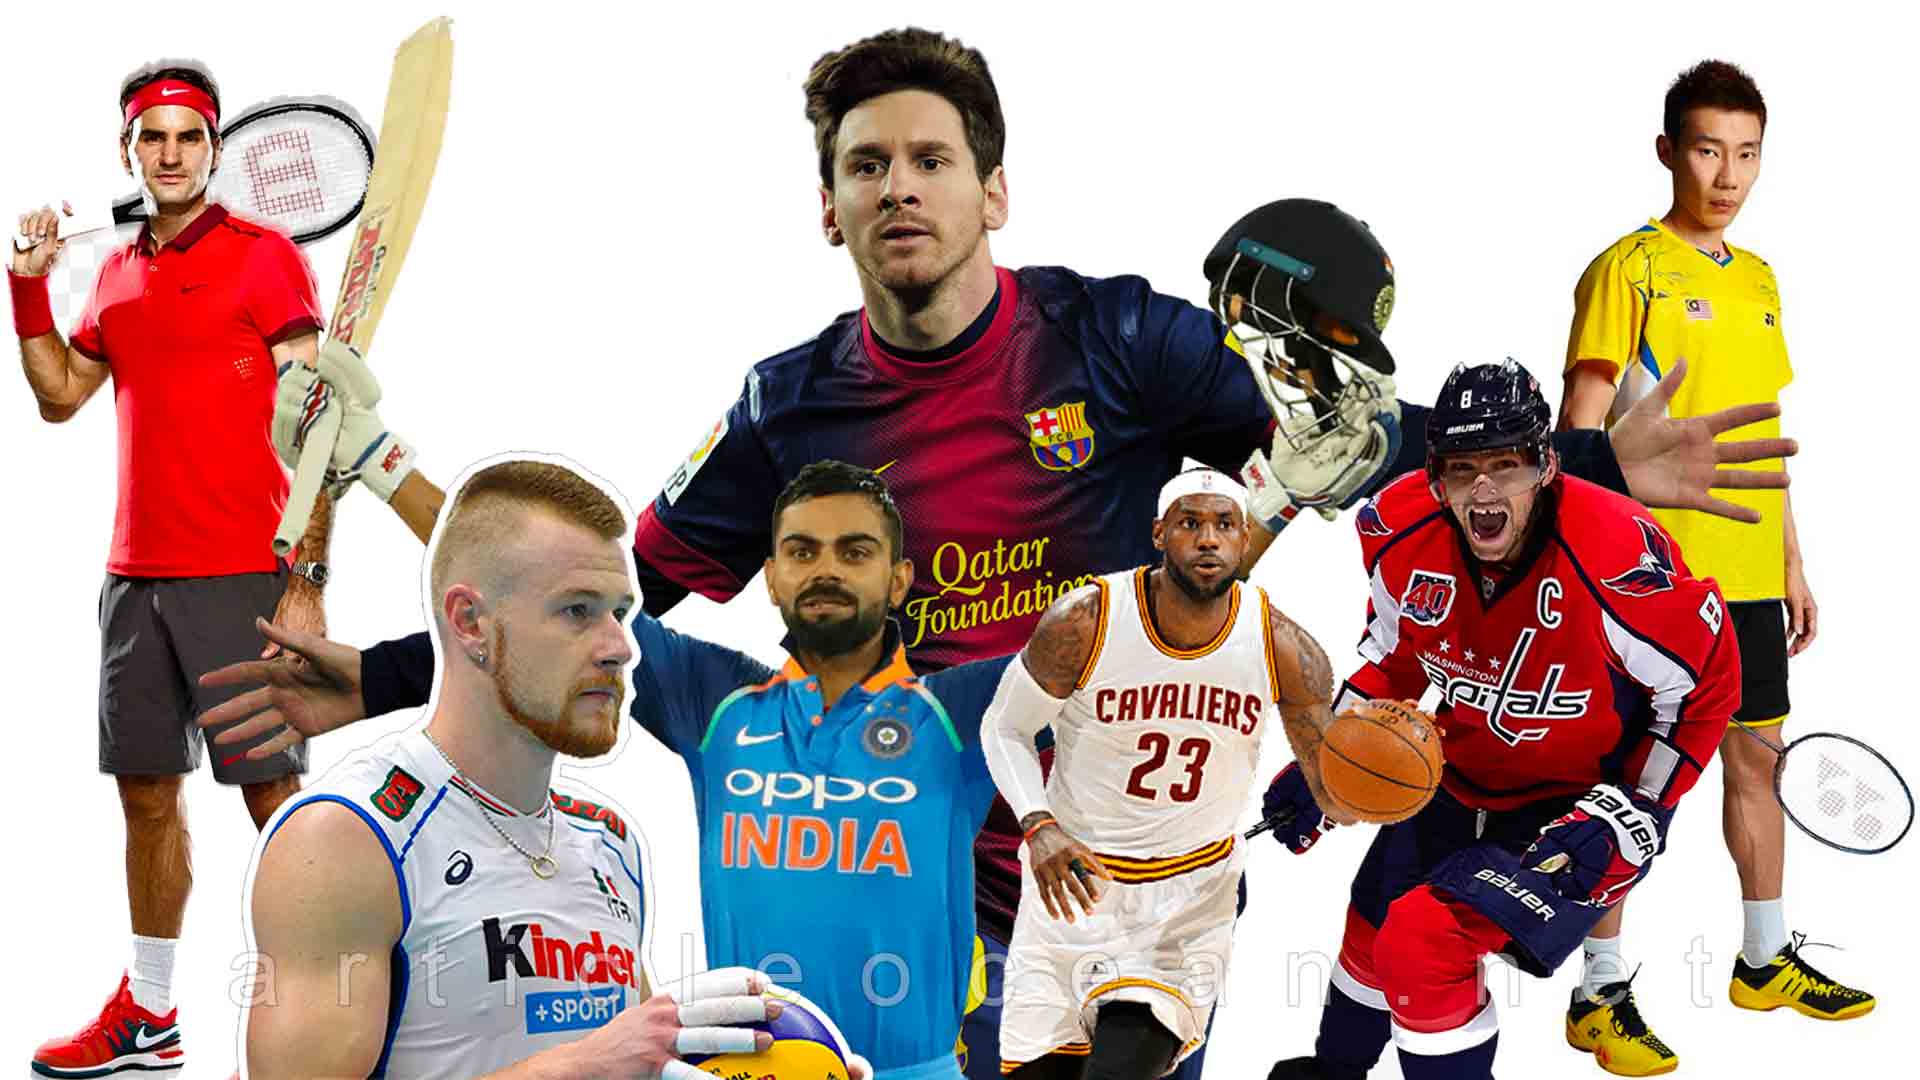 About most popular Sport in the World. Which sport are popular